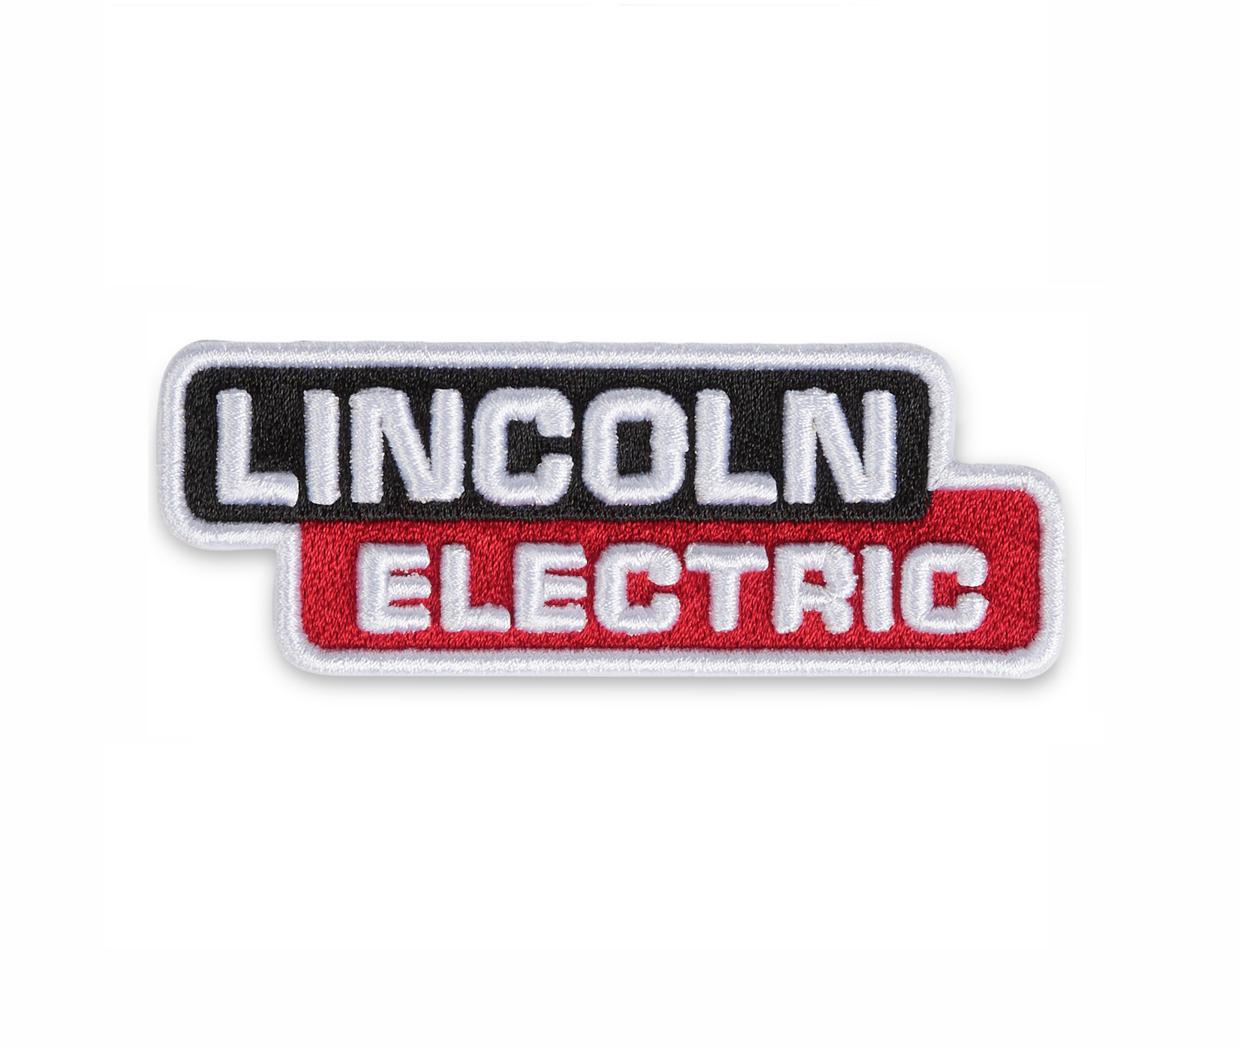 Take Pride In Your Weld Sticker Pack – The Lincoln Electric RedZone